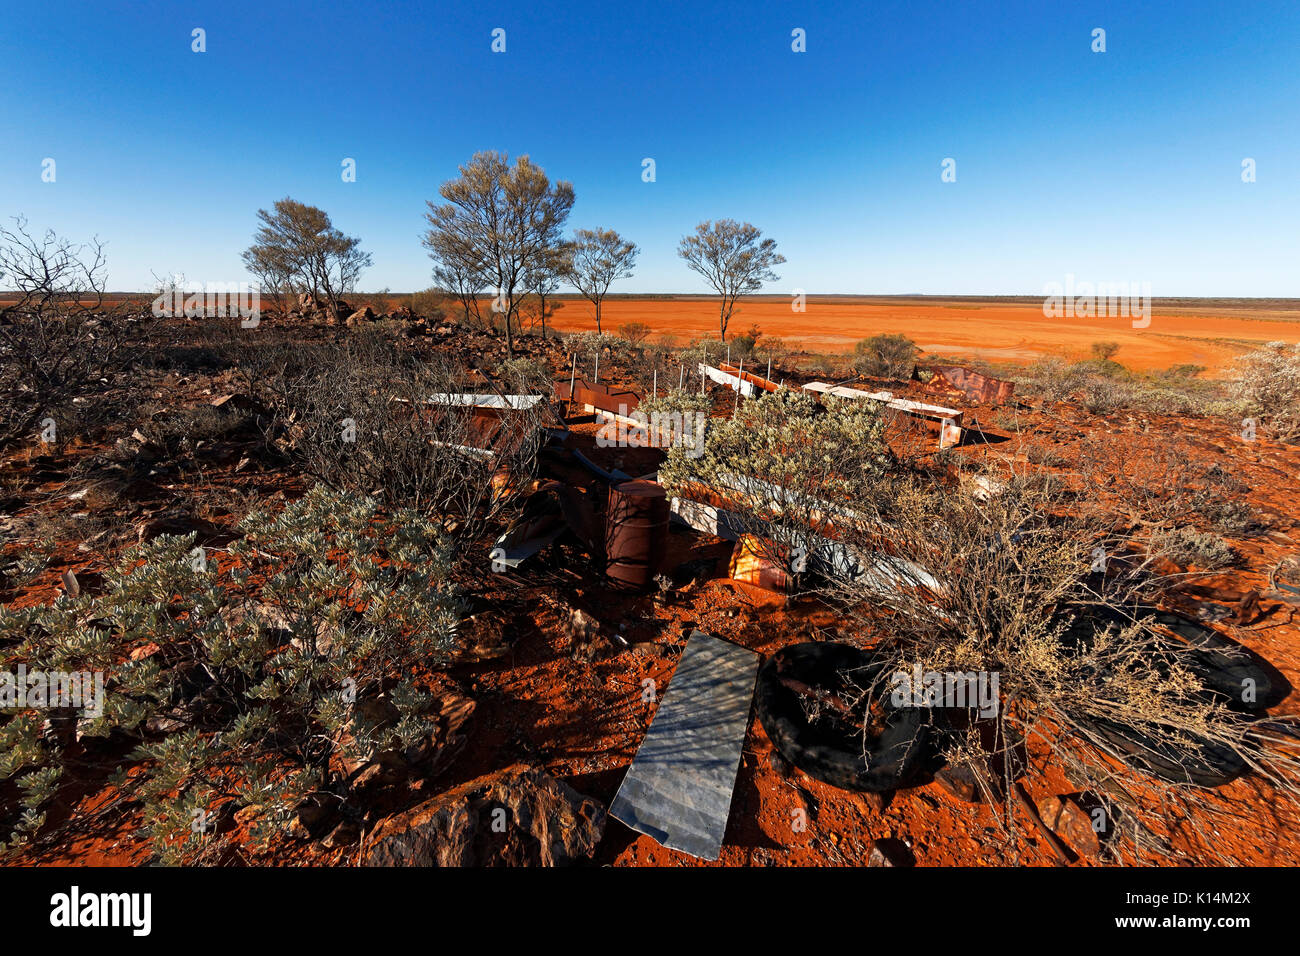 Materials left in landscape from a nearby gold mine, Meekathara, Murchison, Western Australia Stock Photo